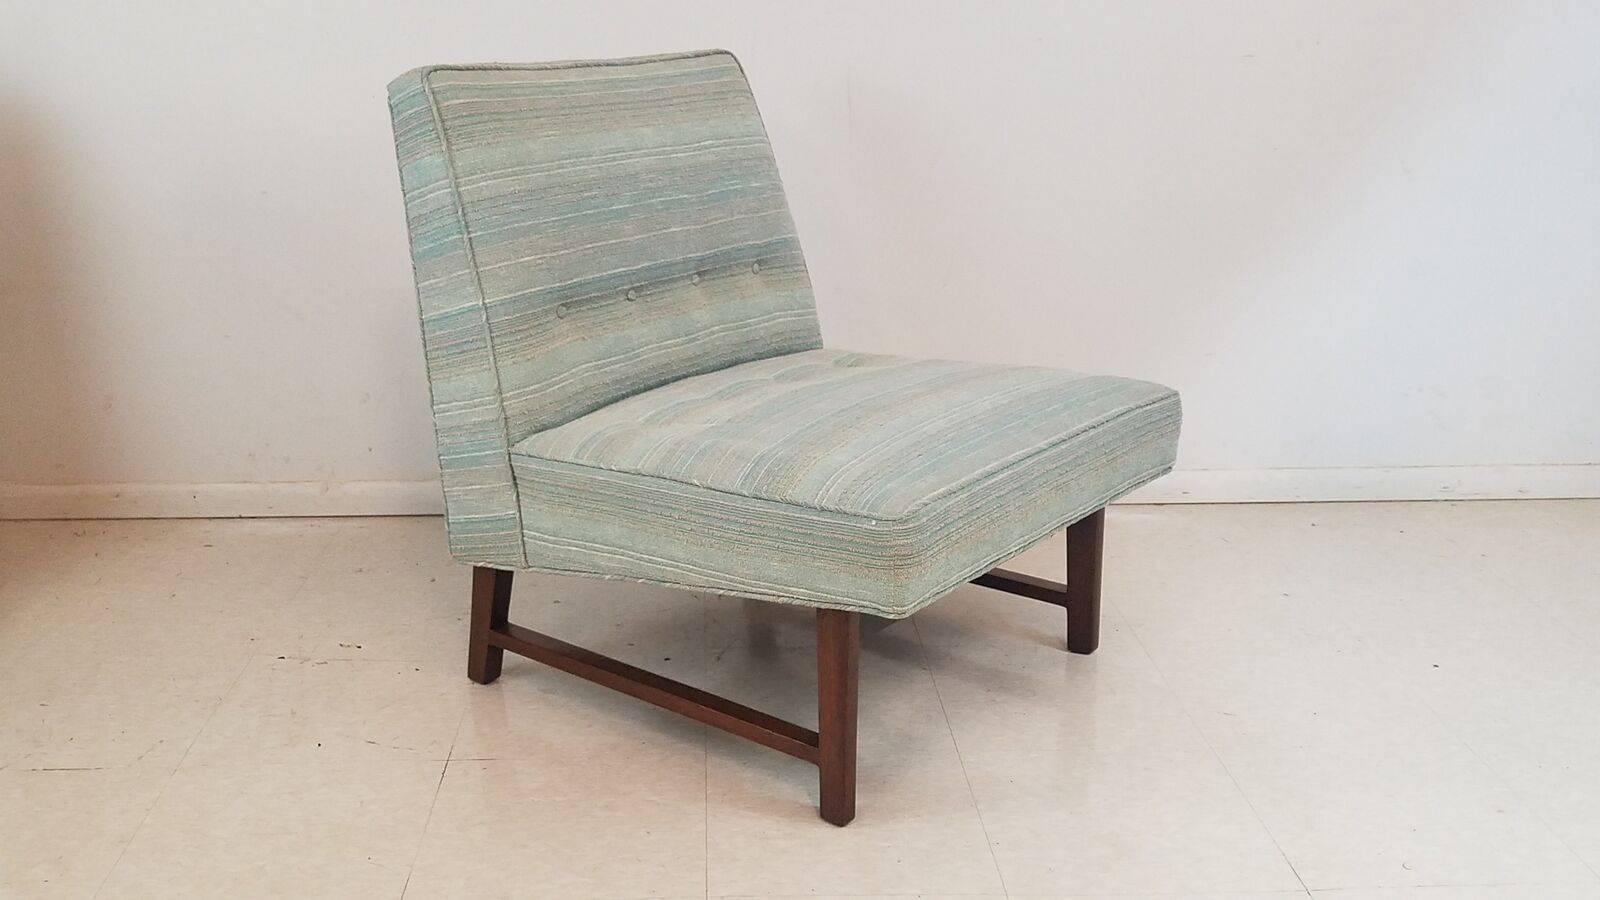 Mid-20th Century Pair of Mid-Century Modern Slipper Chairs by Edward Wormley for Dunbar